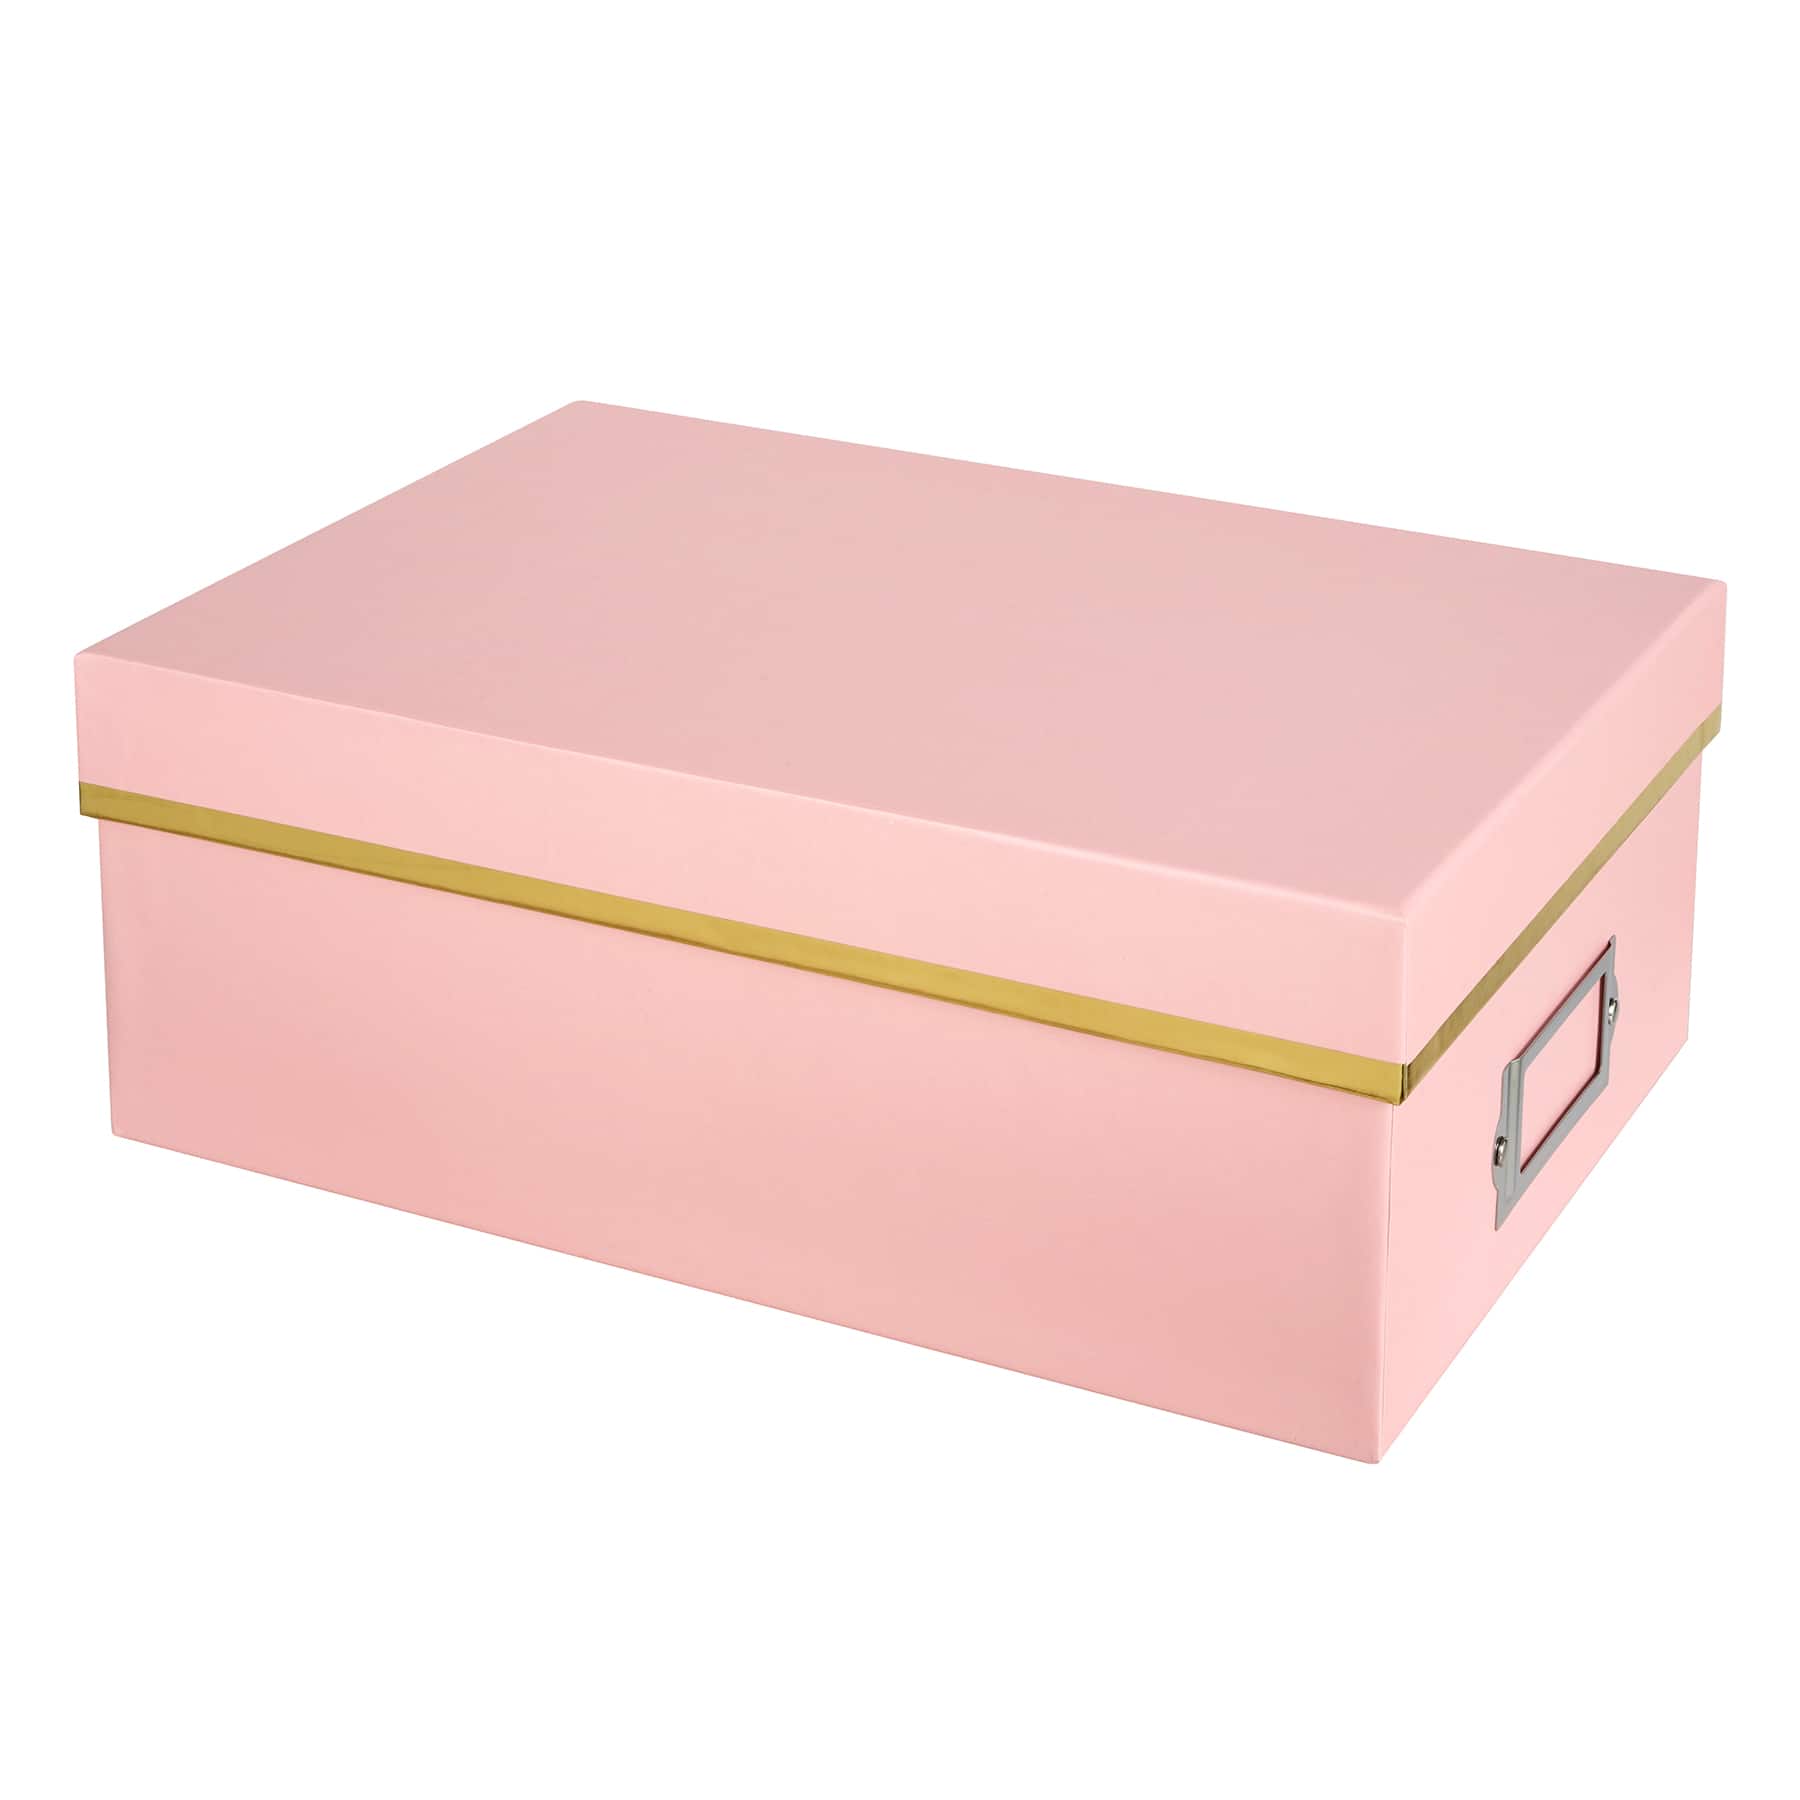 12 Pack: Pink Photo Box by Simply Tidy™ | Michaels